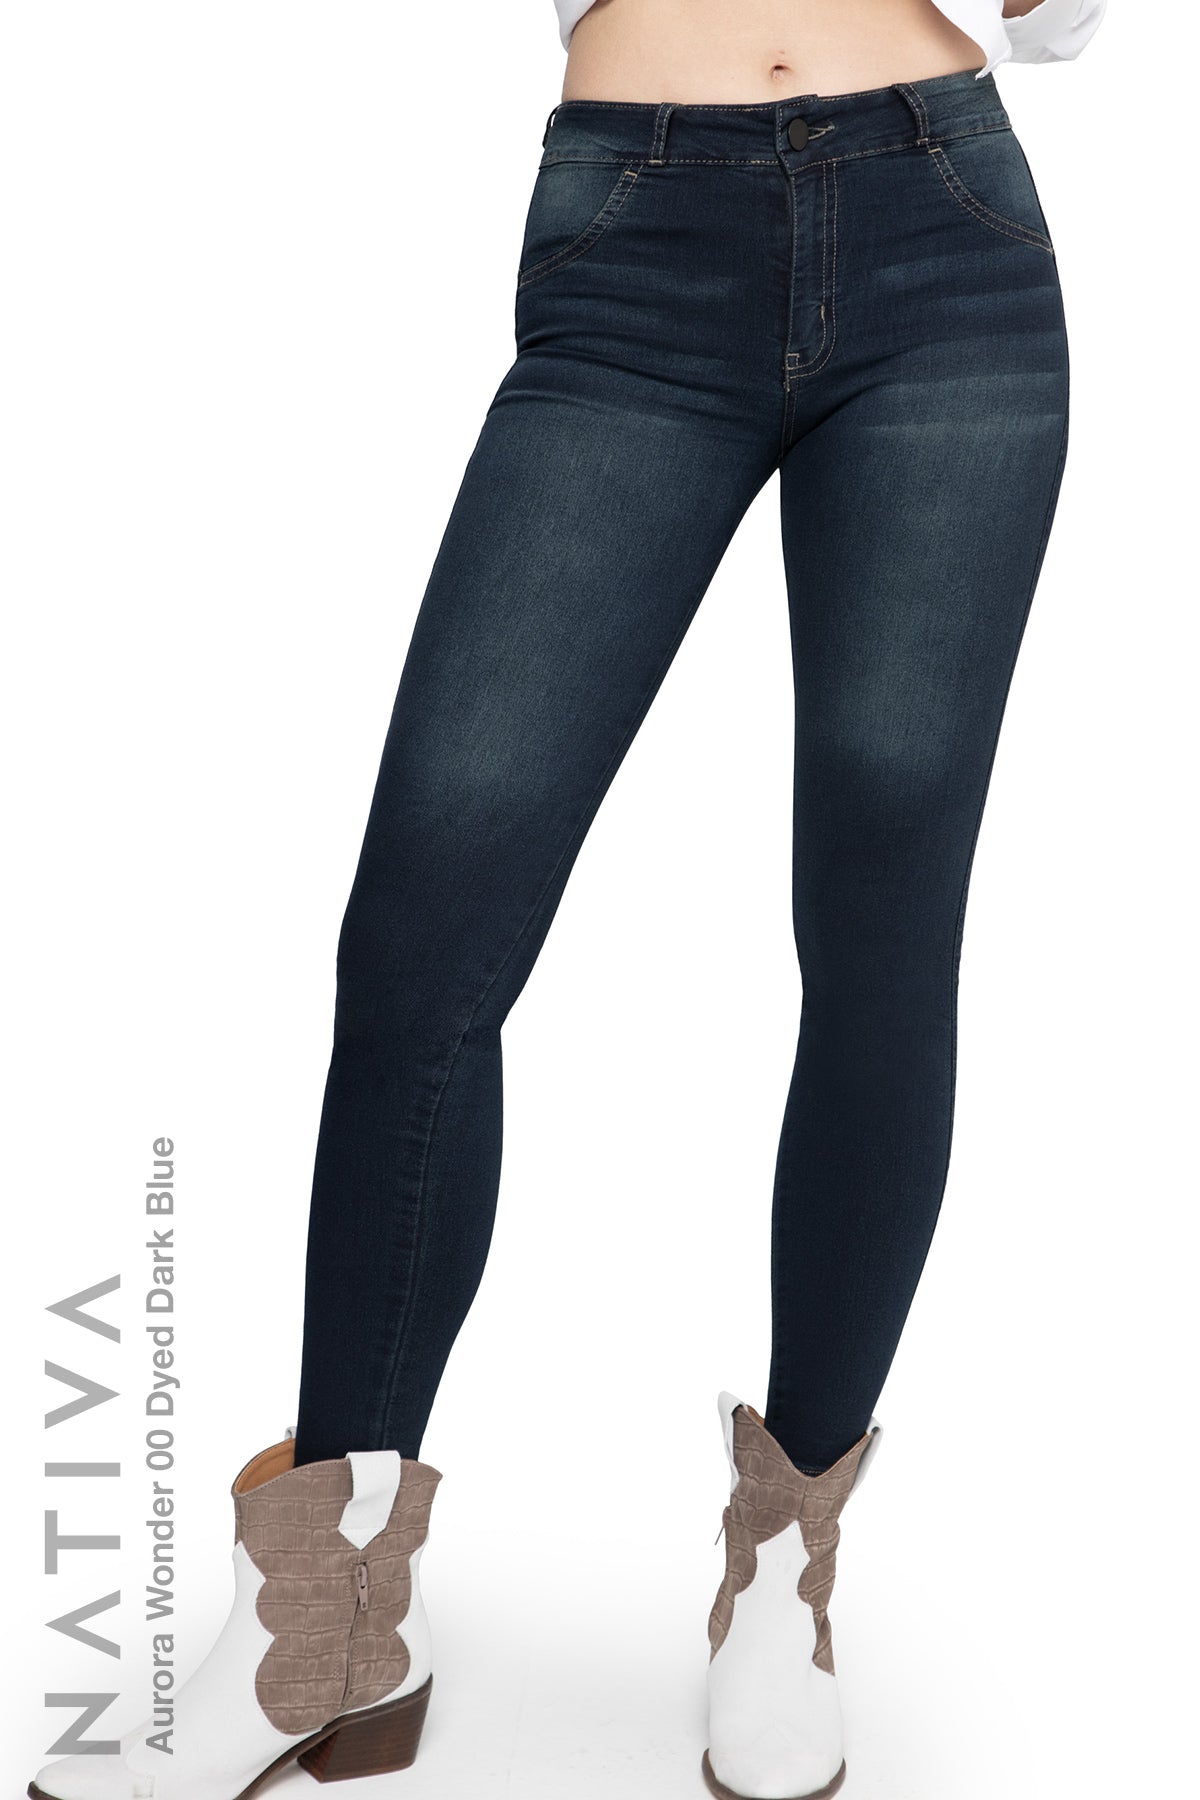 NATIVA, STRETCH JEANS. AURORA DREAM 00 OCEAN BLUE, High Shaping Capacity,  Ultra Comfy, 24-Hour Wear, Mid-Waisted Super Skinny Jeans